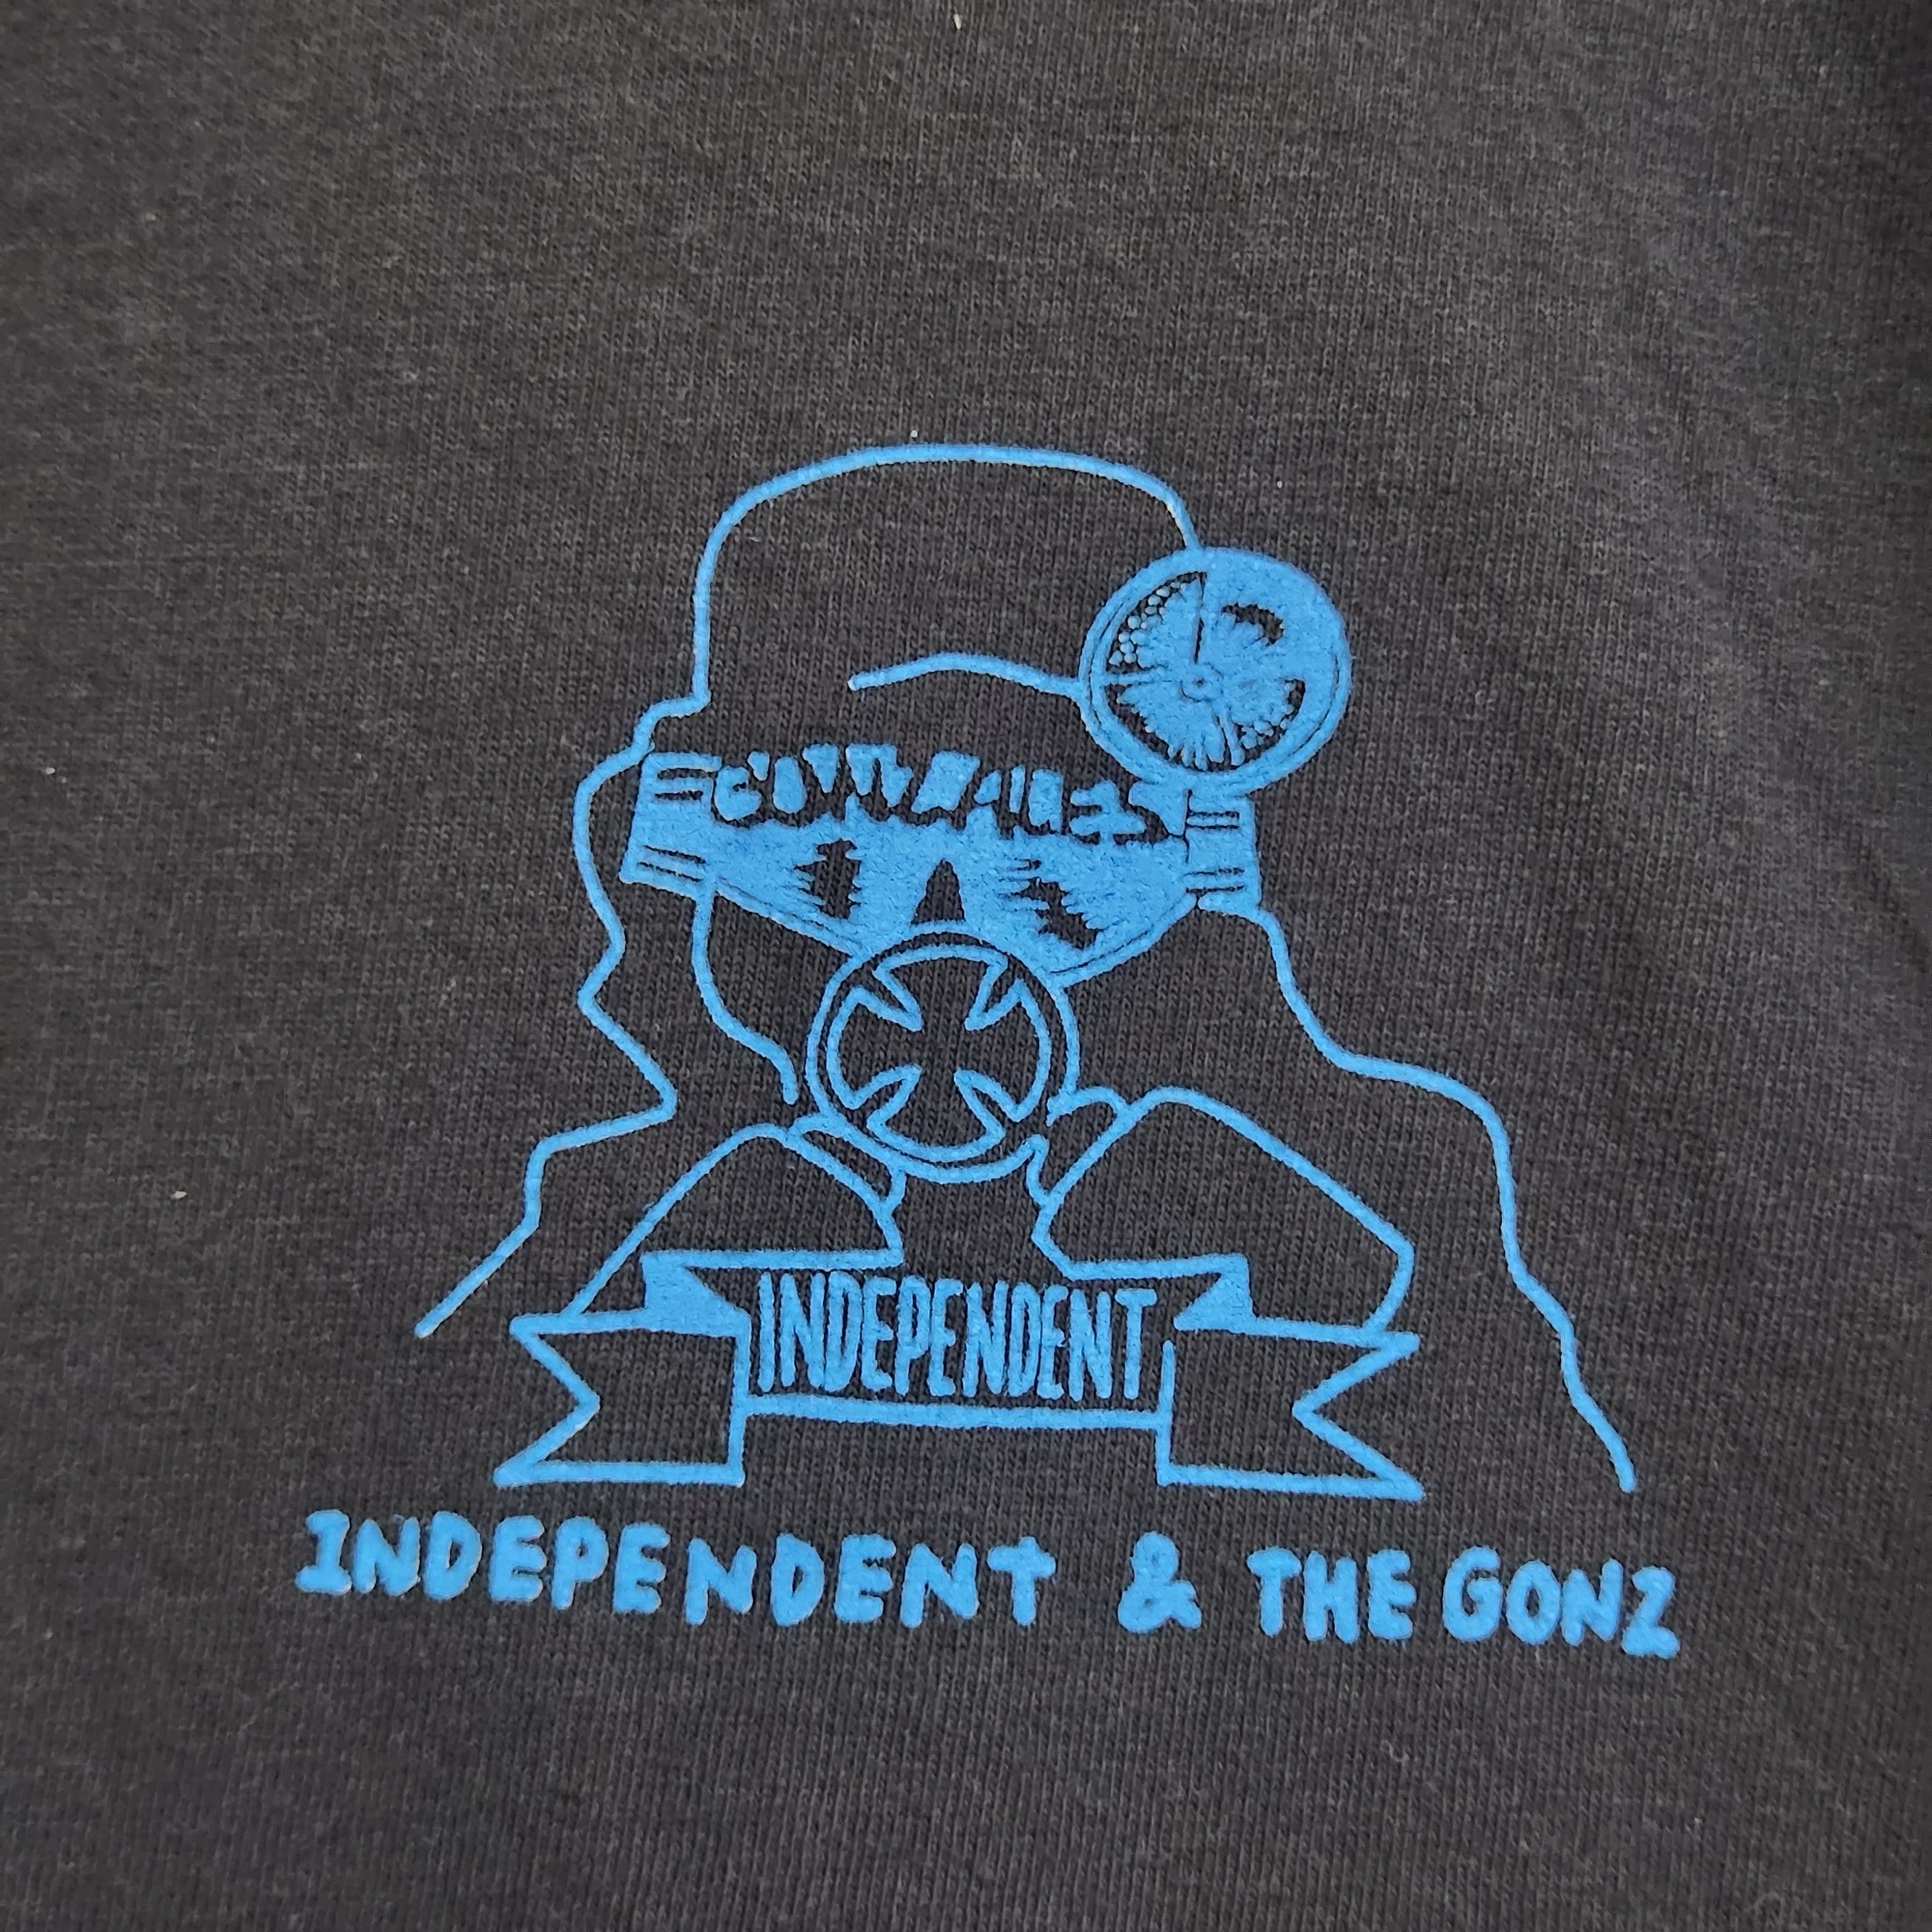 Independent Truck Co. - Independent X The Gonz Skategang Streetwear Tees - 9